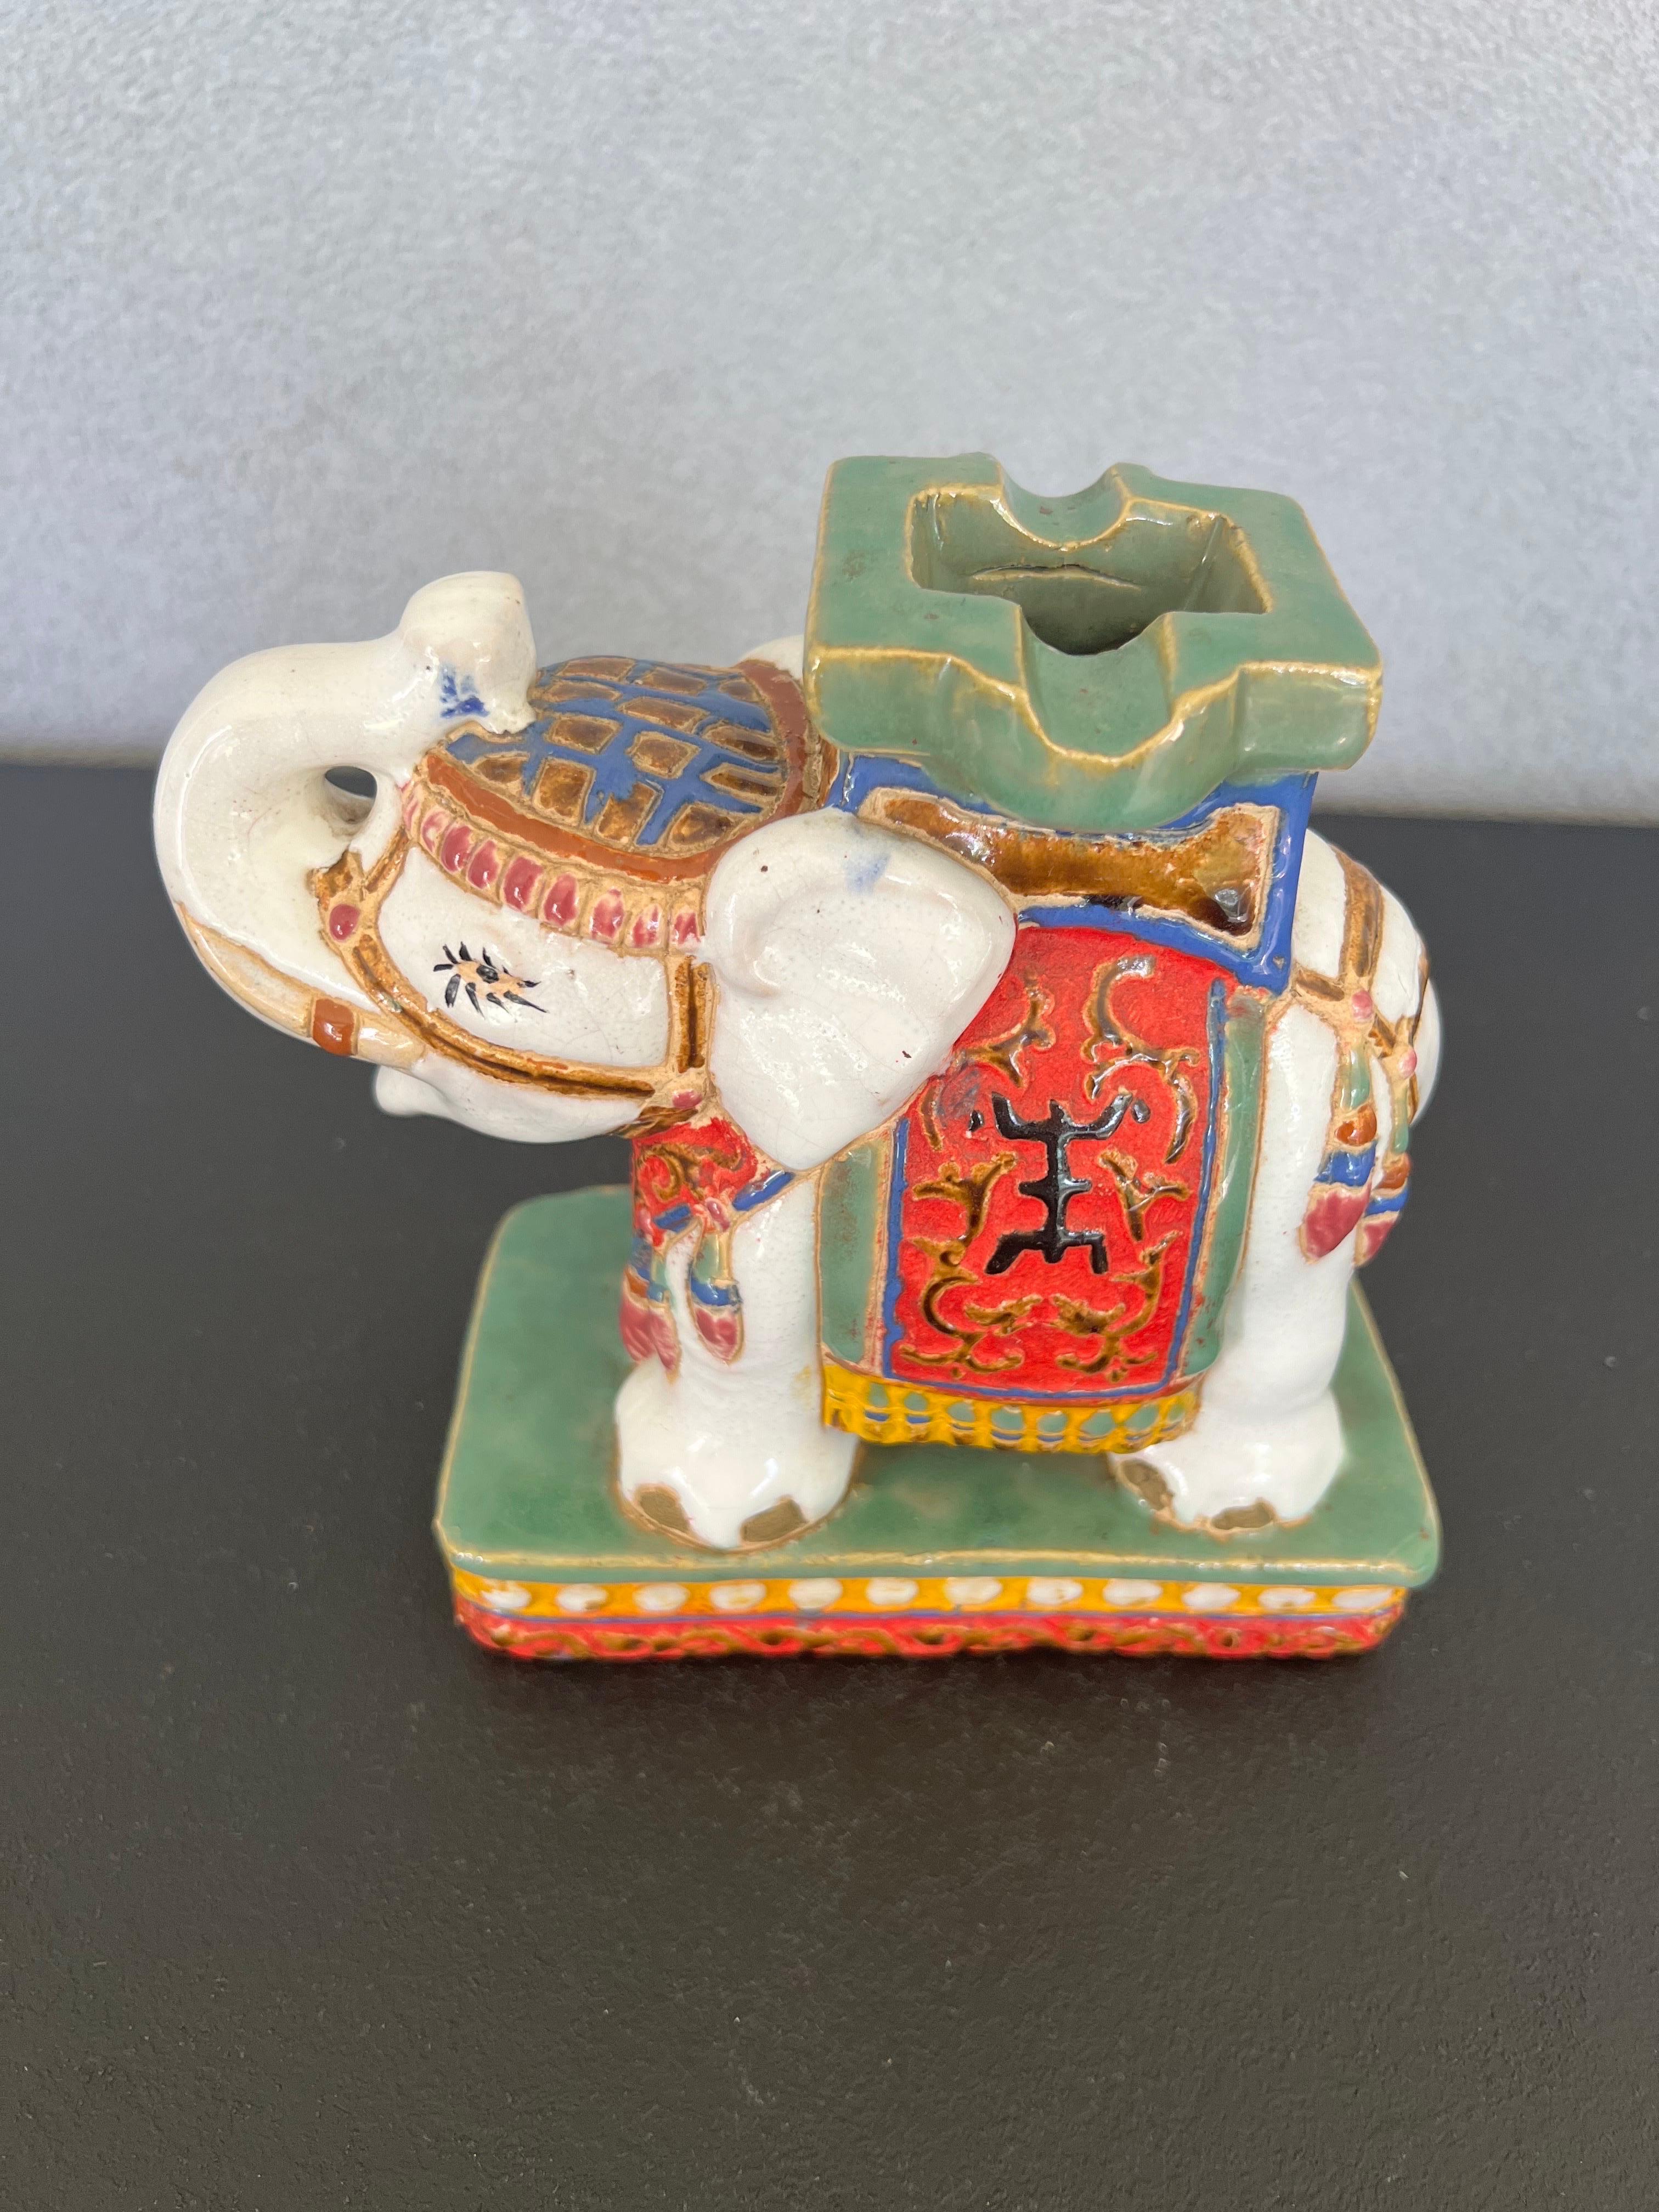 If you love Garden elephant stools this Ashtray is for you!
Beautiful Hand- Painted with the same amount of details you see in garden stools but this is a mini version made as an ashtray 
it could be use as  a small bud vase too,or just as decor on